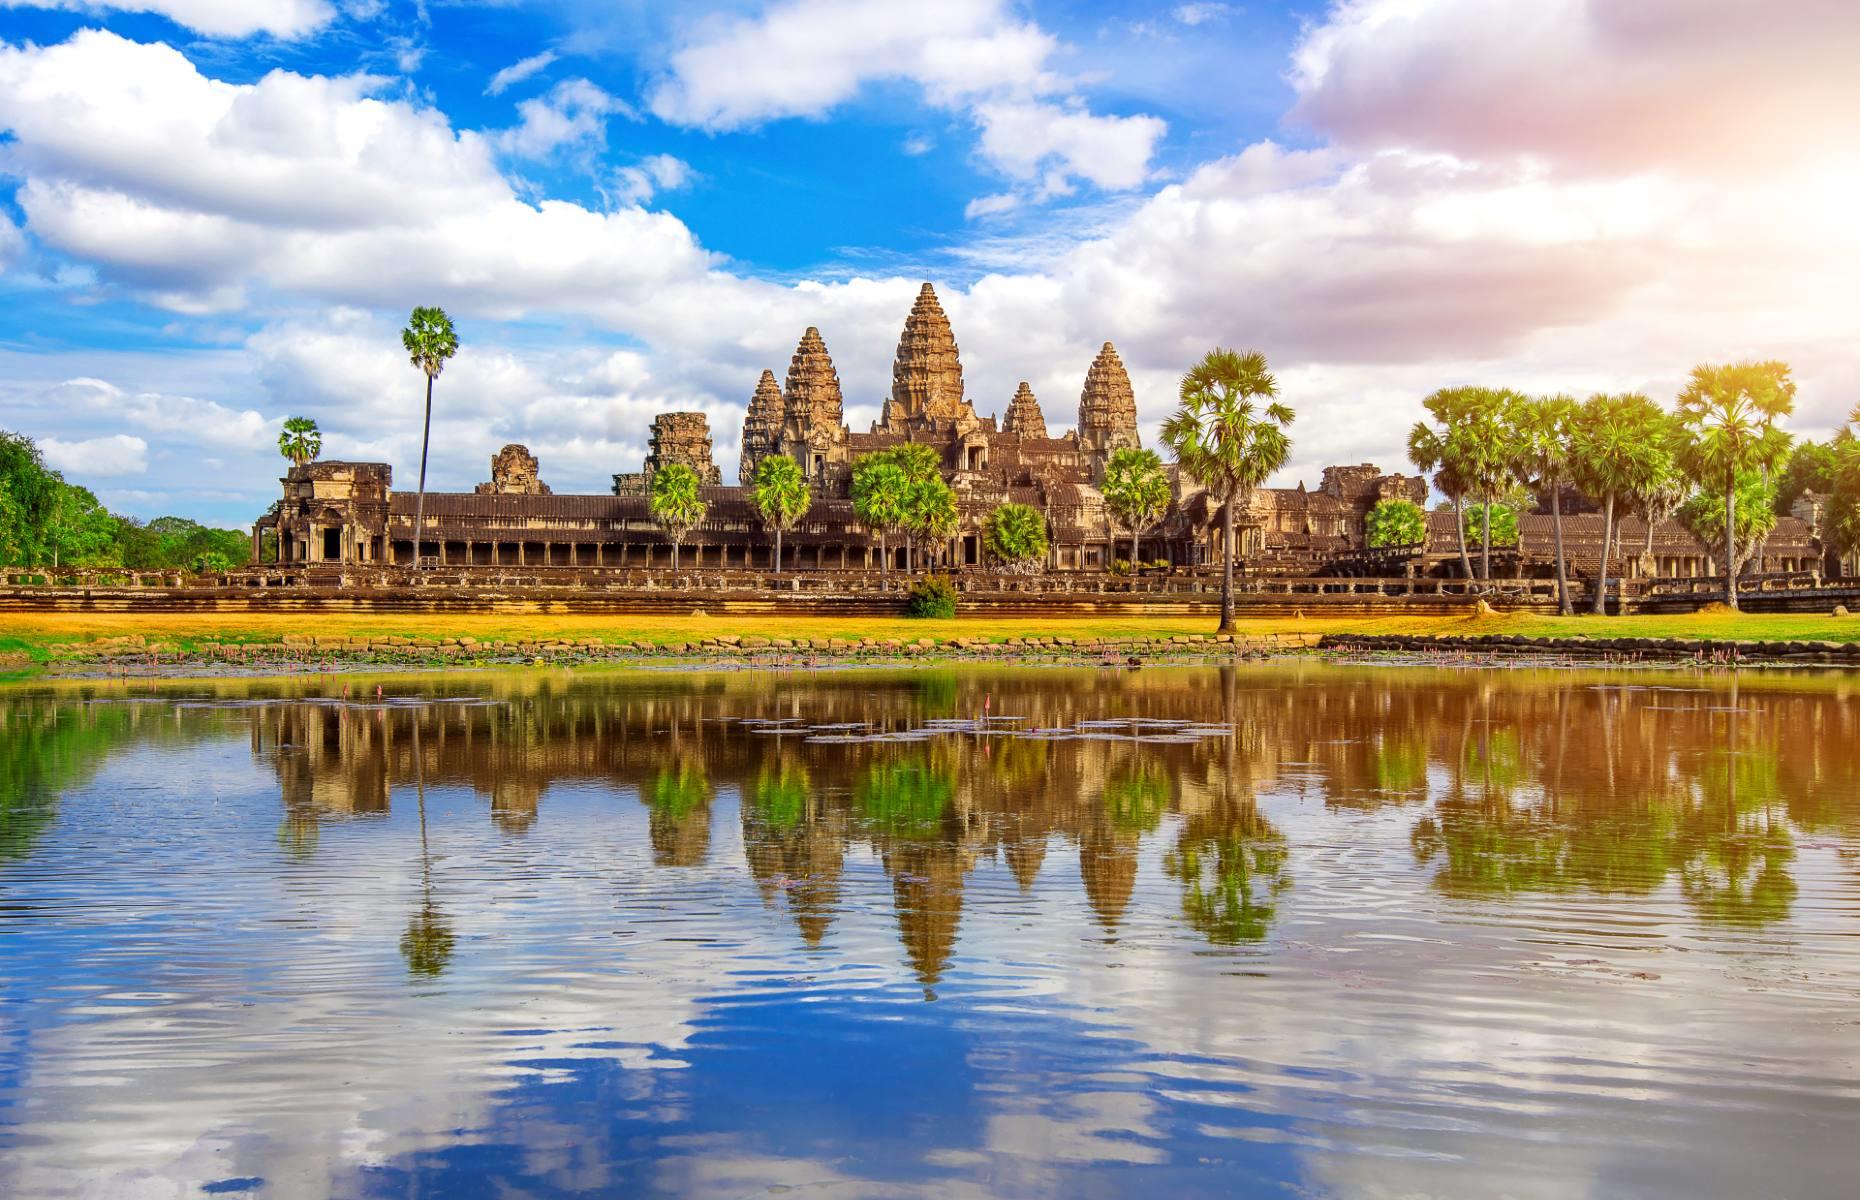 <p>The most recognisable temple in Cambodia, Angkor Wat was constructed in the 12th century by King Suryavarman II and was used as his burial place when he died. But the temple is far from the only thing to see here. In fact the entire Angkor Archaeological Park stretches across 154 square miles (400sq km) and contains more than 1,000 buildings, which are considered the best surviving examples of Khmer art and architecture. It’s best to visit at sunrise, when the weather is a little cooler and the park is less crowded, and allow around half a day to explore. </p>